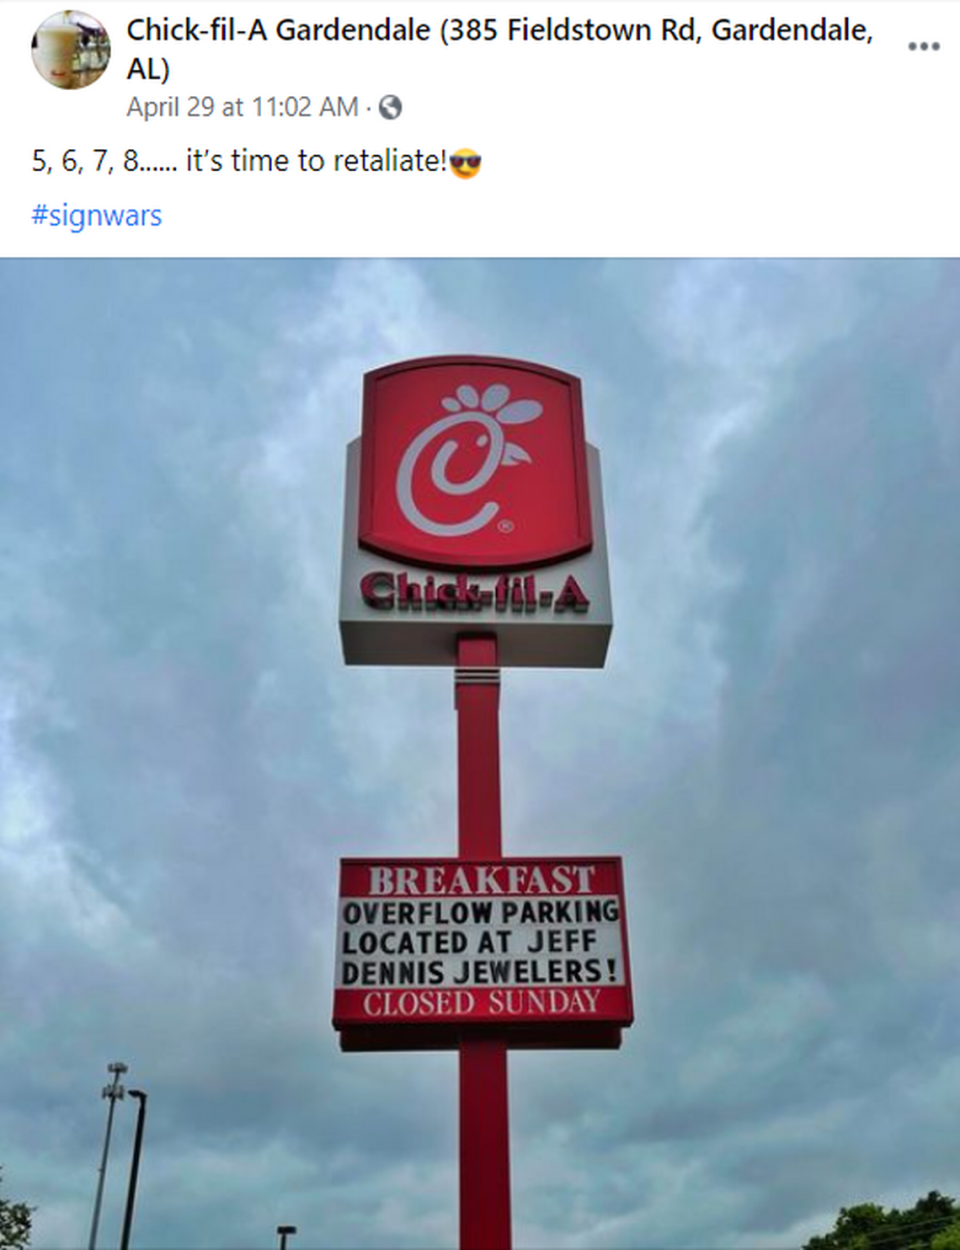 Chick-Fil-A quickly joined in the sign war.